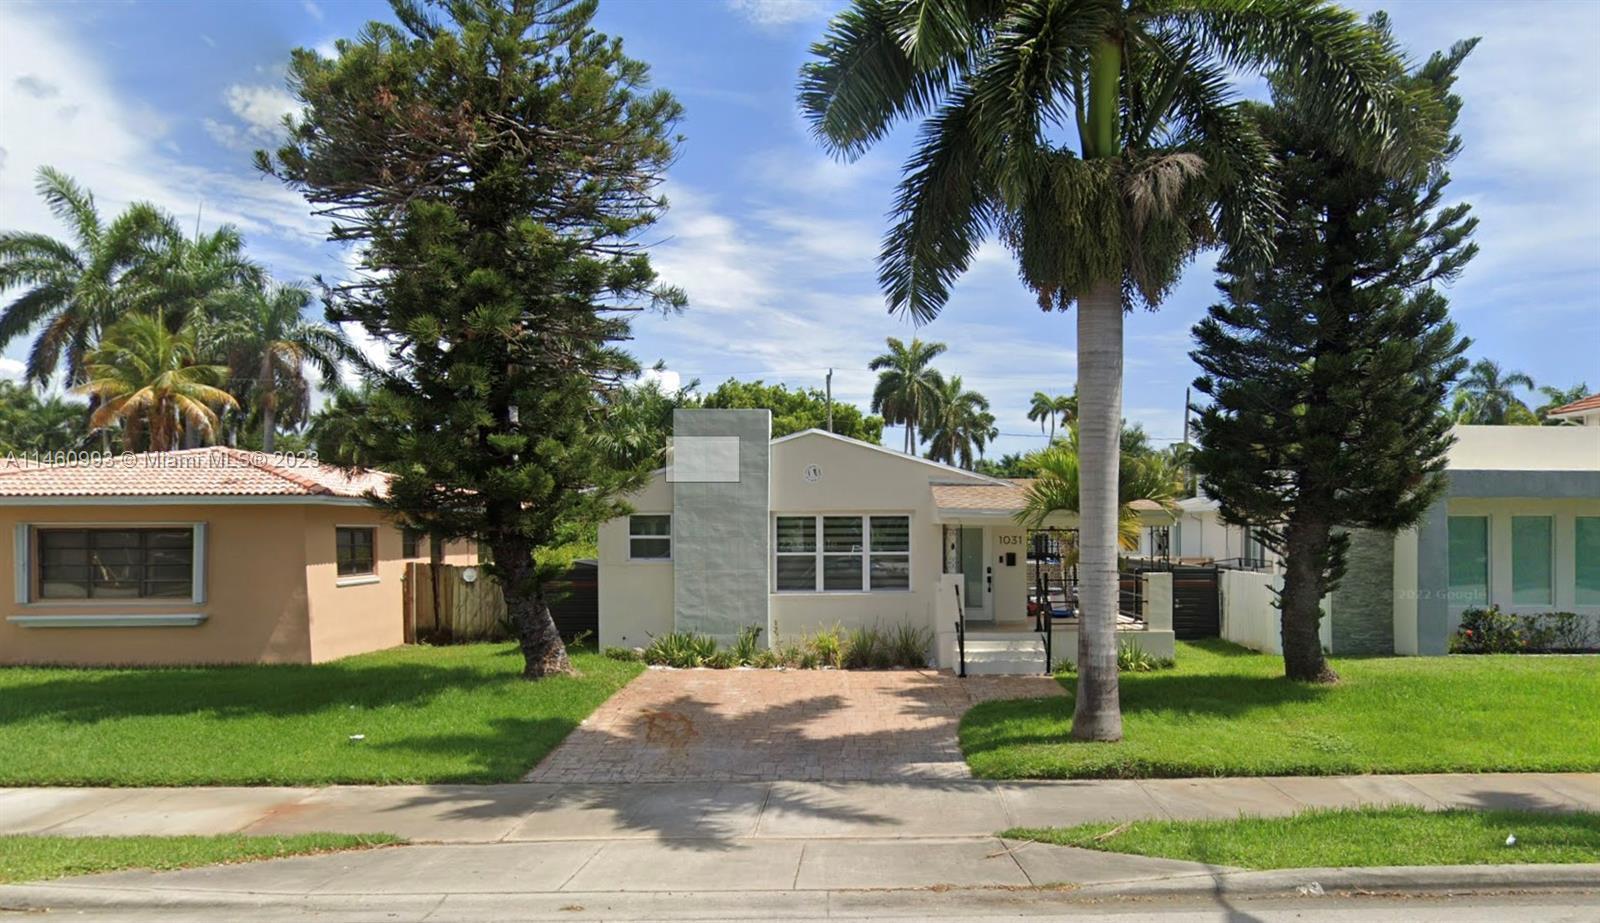 LOCATION-LOCATION-LOCATION! Great home in the walking distance to the ocean and main street with res